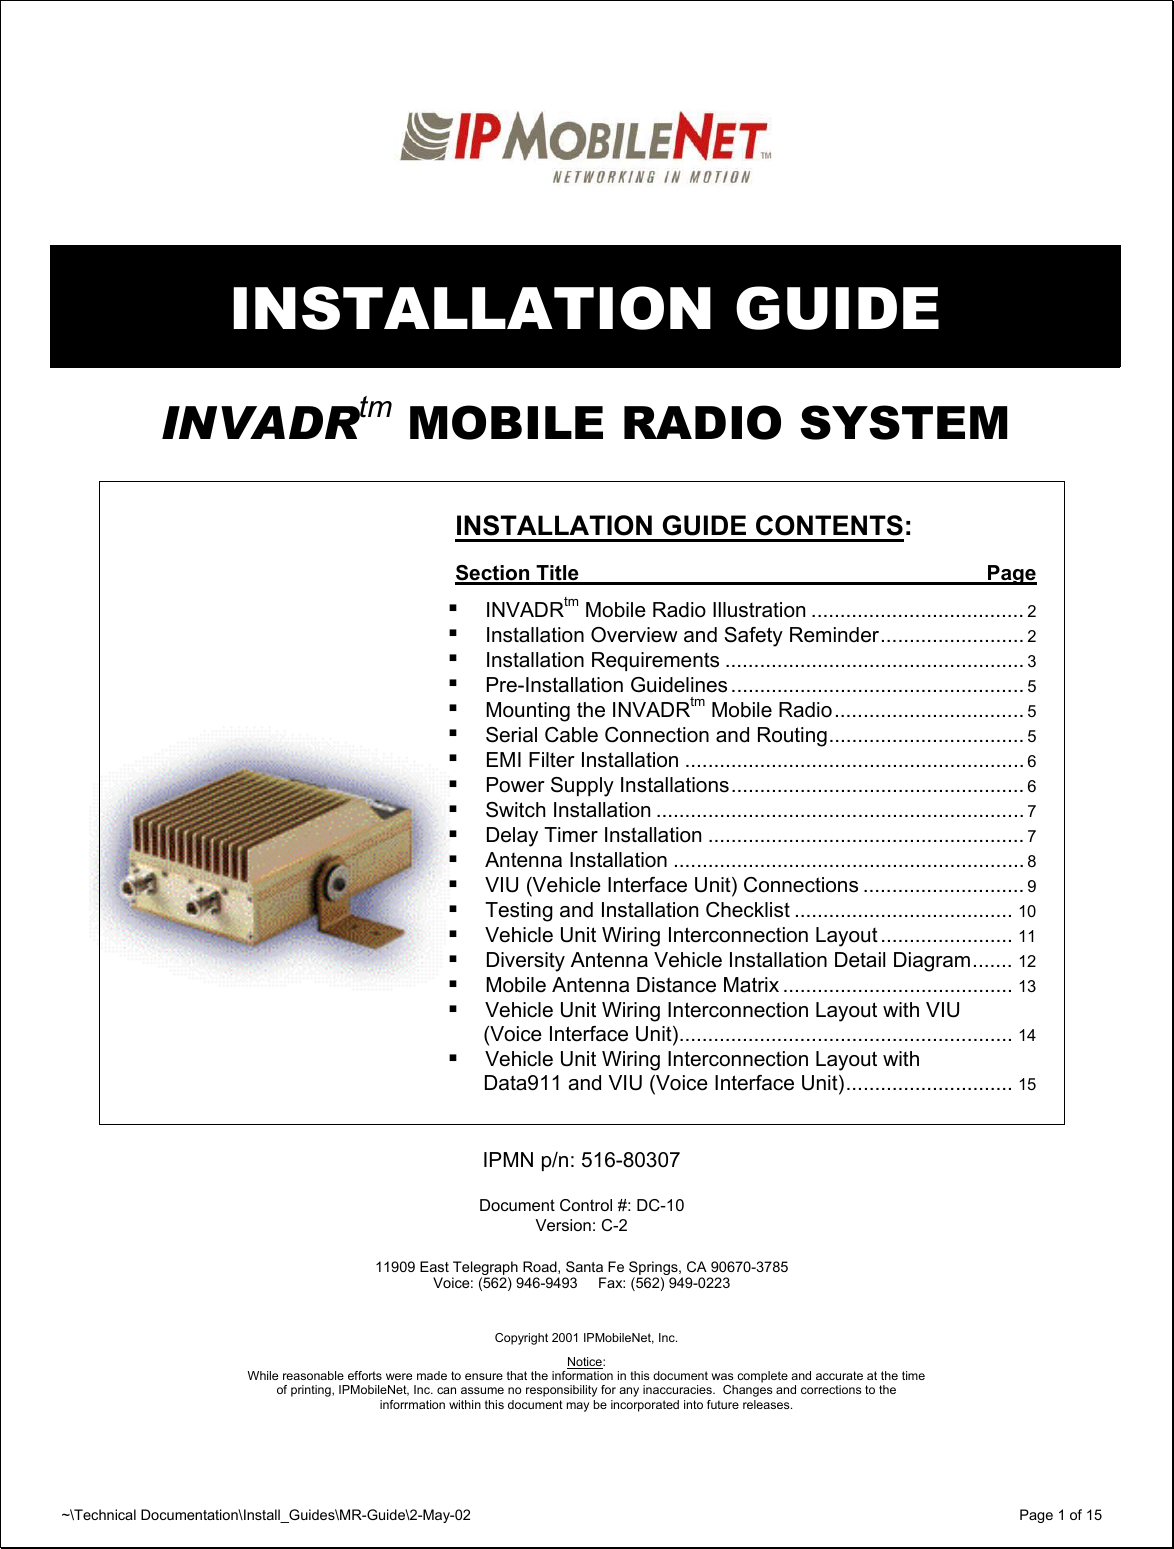 ~\Technical Documentation\Install_Guides\MR-Guide\2-May-02   Page 1 of 15    INSTALLATION GUIDE  INVADRtm MOBILE RADIO SYSTEM      INSTALLATION GUIDE CONTENTS:  Section Title  Page    INVADRtm Mobile Radio Illustration ..................................... 2   Installation Overview and Safety Reminder......................... 2   Installation Requirements .................................................... 3   Pre-Installation Guidelines ................................................... 5   Mounting the INVADRtm Mobile Radio................................. 5   Serial Cable Connection and Routing.................................. 5   EMI Filter Installation ........................................................... 6   Power Supply Installations................................................... 6   Switch Installation ................................................................ 7   Delay Timer Installation ....................................................... 7   Antenna Installation ............................................................. 8   VIU (Vehicle Interface Unit) Connections ............................ 9   Testing and Installation Checklist ...................................... 10   Vehicle Unit Wiring Interconnection Layout ....................... 11   Diversity Antenna Vehicle Installation Detail Diagram....... 12   Mobile Antenna Distance Matrix ........................................ 13   Vehicle Unit Wiring Interconnection Layout with VIU   (Voice Interface Unit).......................................................... 14   Vehicle Unit Wiring Interconnection Layout with   Data911 and VIU (Voice Interface Unit)............................. 15   IPMN p/n: 516-80307  Document Control #: DC-10 Version: C-2  11909 East Telegraph Road, Santa Fe Springs, CA 90670-3785 Voice: (562) 946-9493     Fax: (562) 949-0223     Copyright 2001 IPMobileNet, Inc.  Notice:  While reasonable efforts were made to ensure that the information in this document was complete and accurate at the time of printing, IPMobileNet, Inc. can assume no responsibility for any inaccuracies.  Changes and corrections to the  inforrmation within this document may be incorporated into future releases.